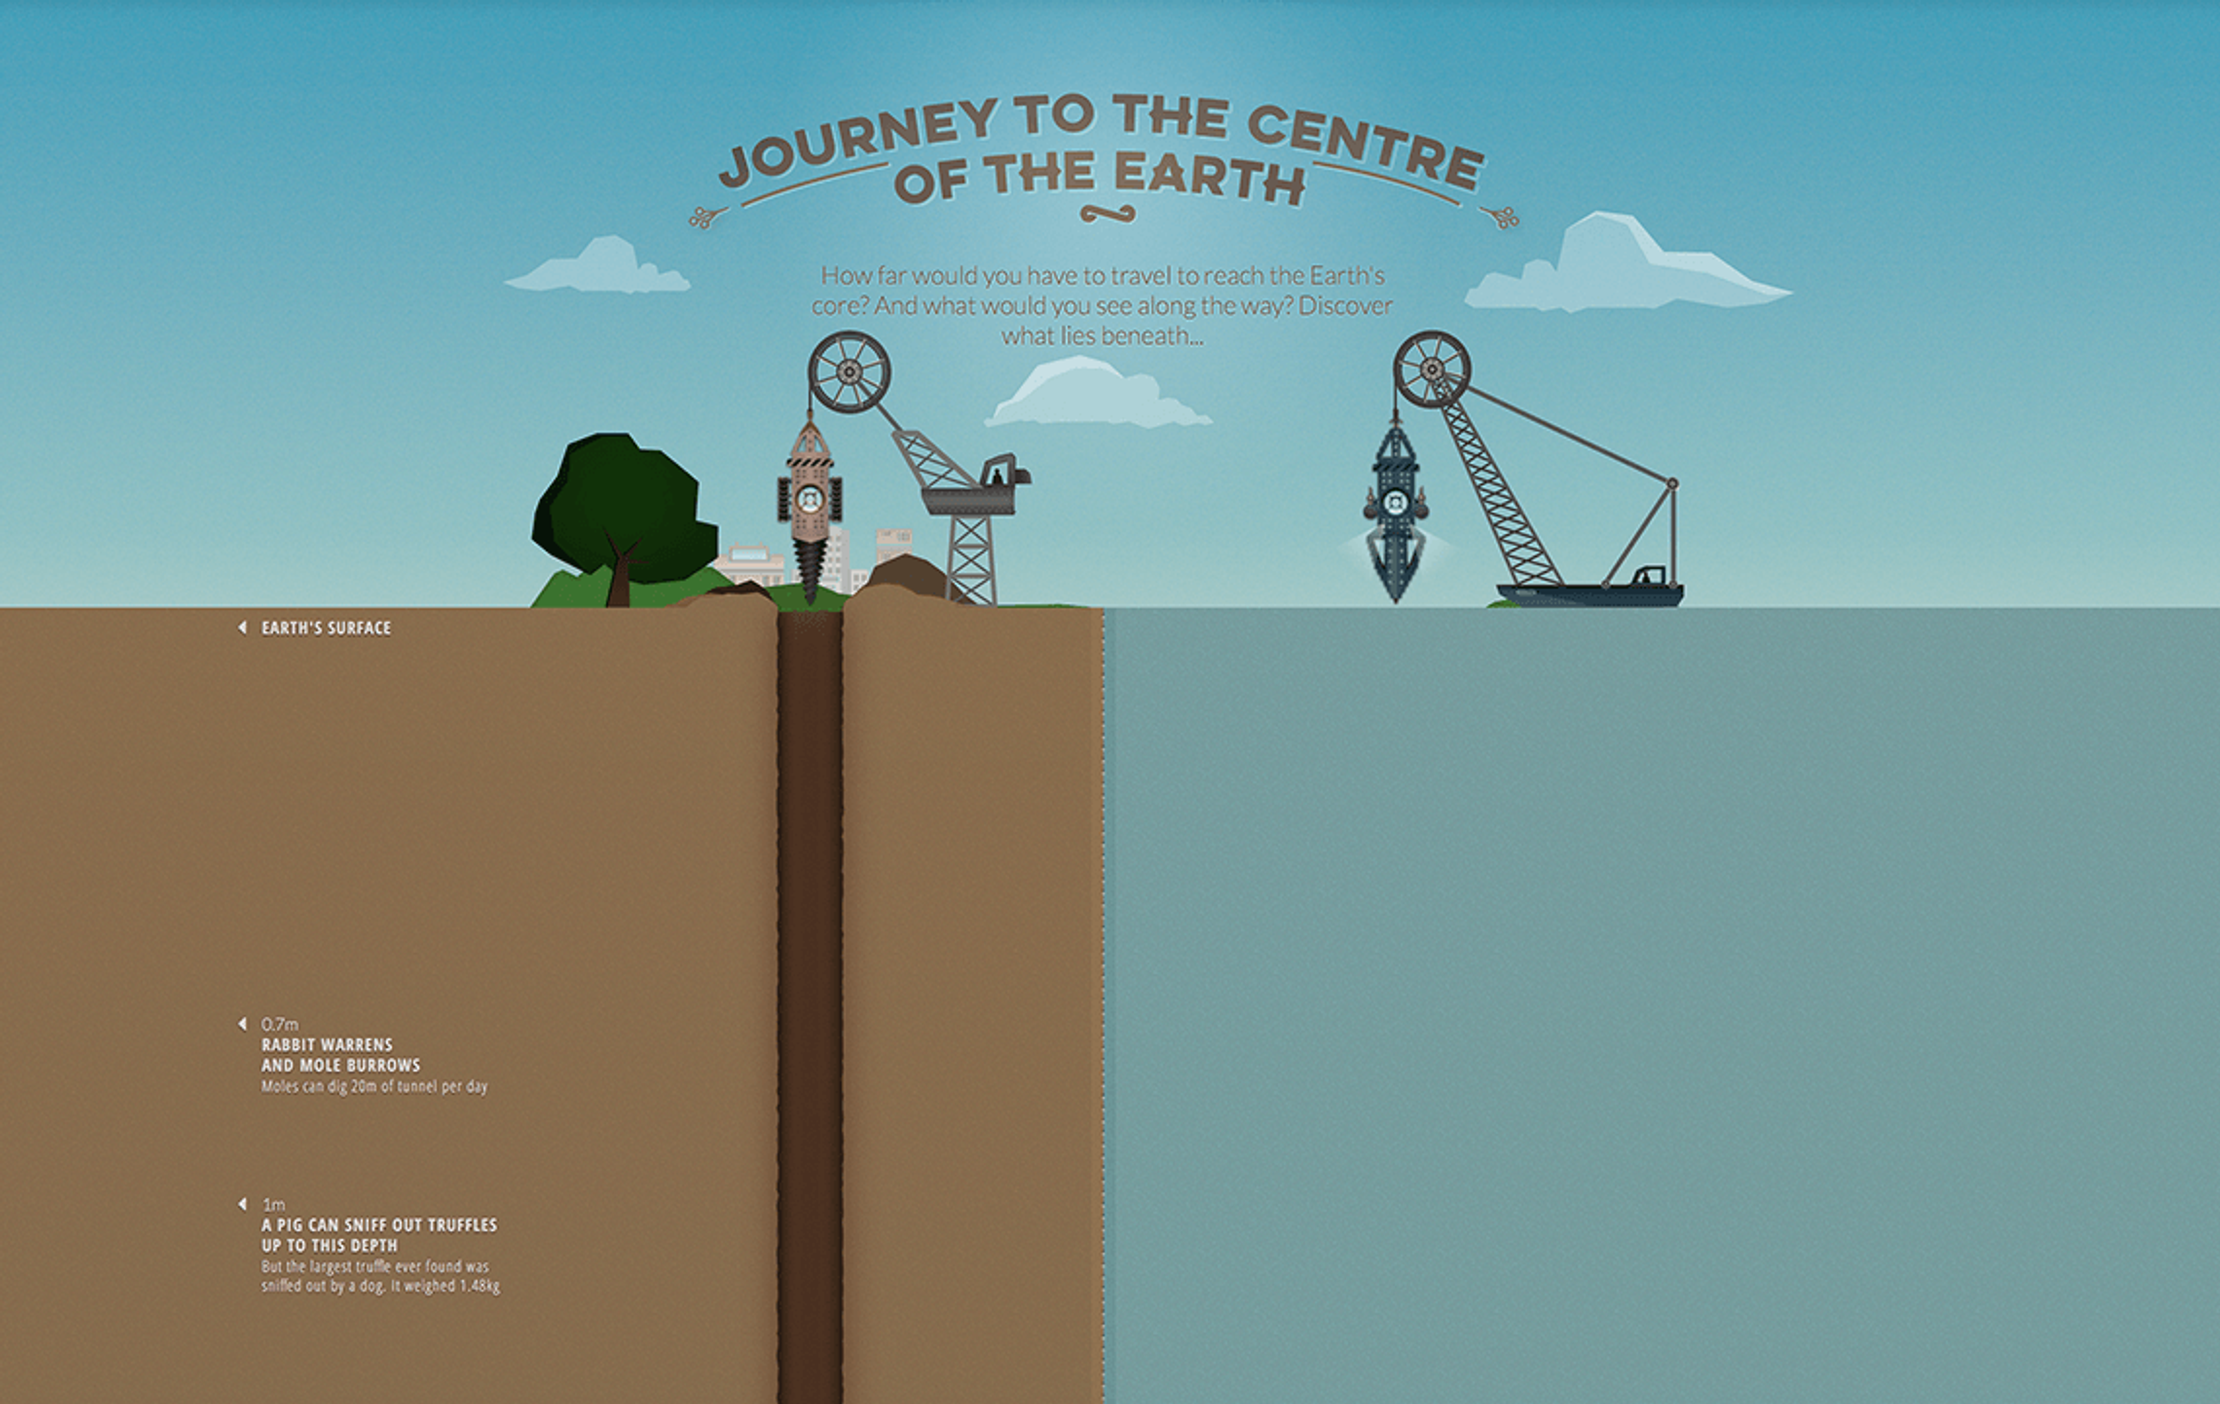 An image from the start of 'Journey to the Centre of the Earth' page. A title with the same name sits in the middle against a blue sky and two illustrated exploration vehichles sit below it. One vehichle sits on the ground above a deep hole, the other sits suspended from a crane on a boat above the ocean. Both point down, about to start their voyage.